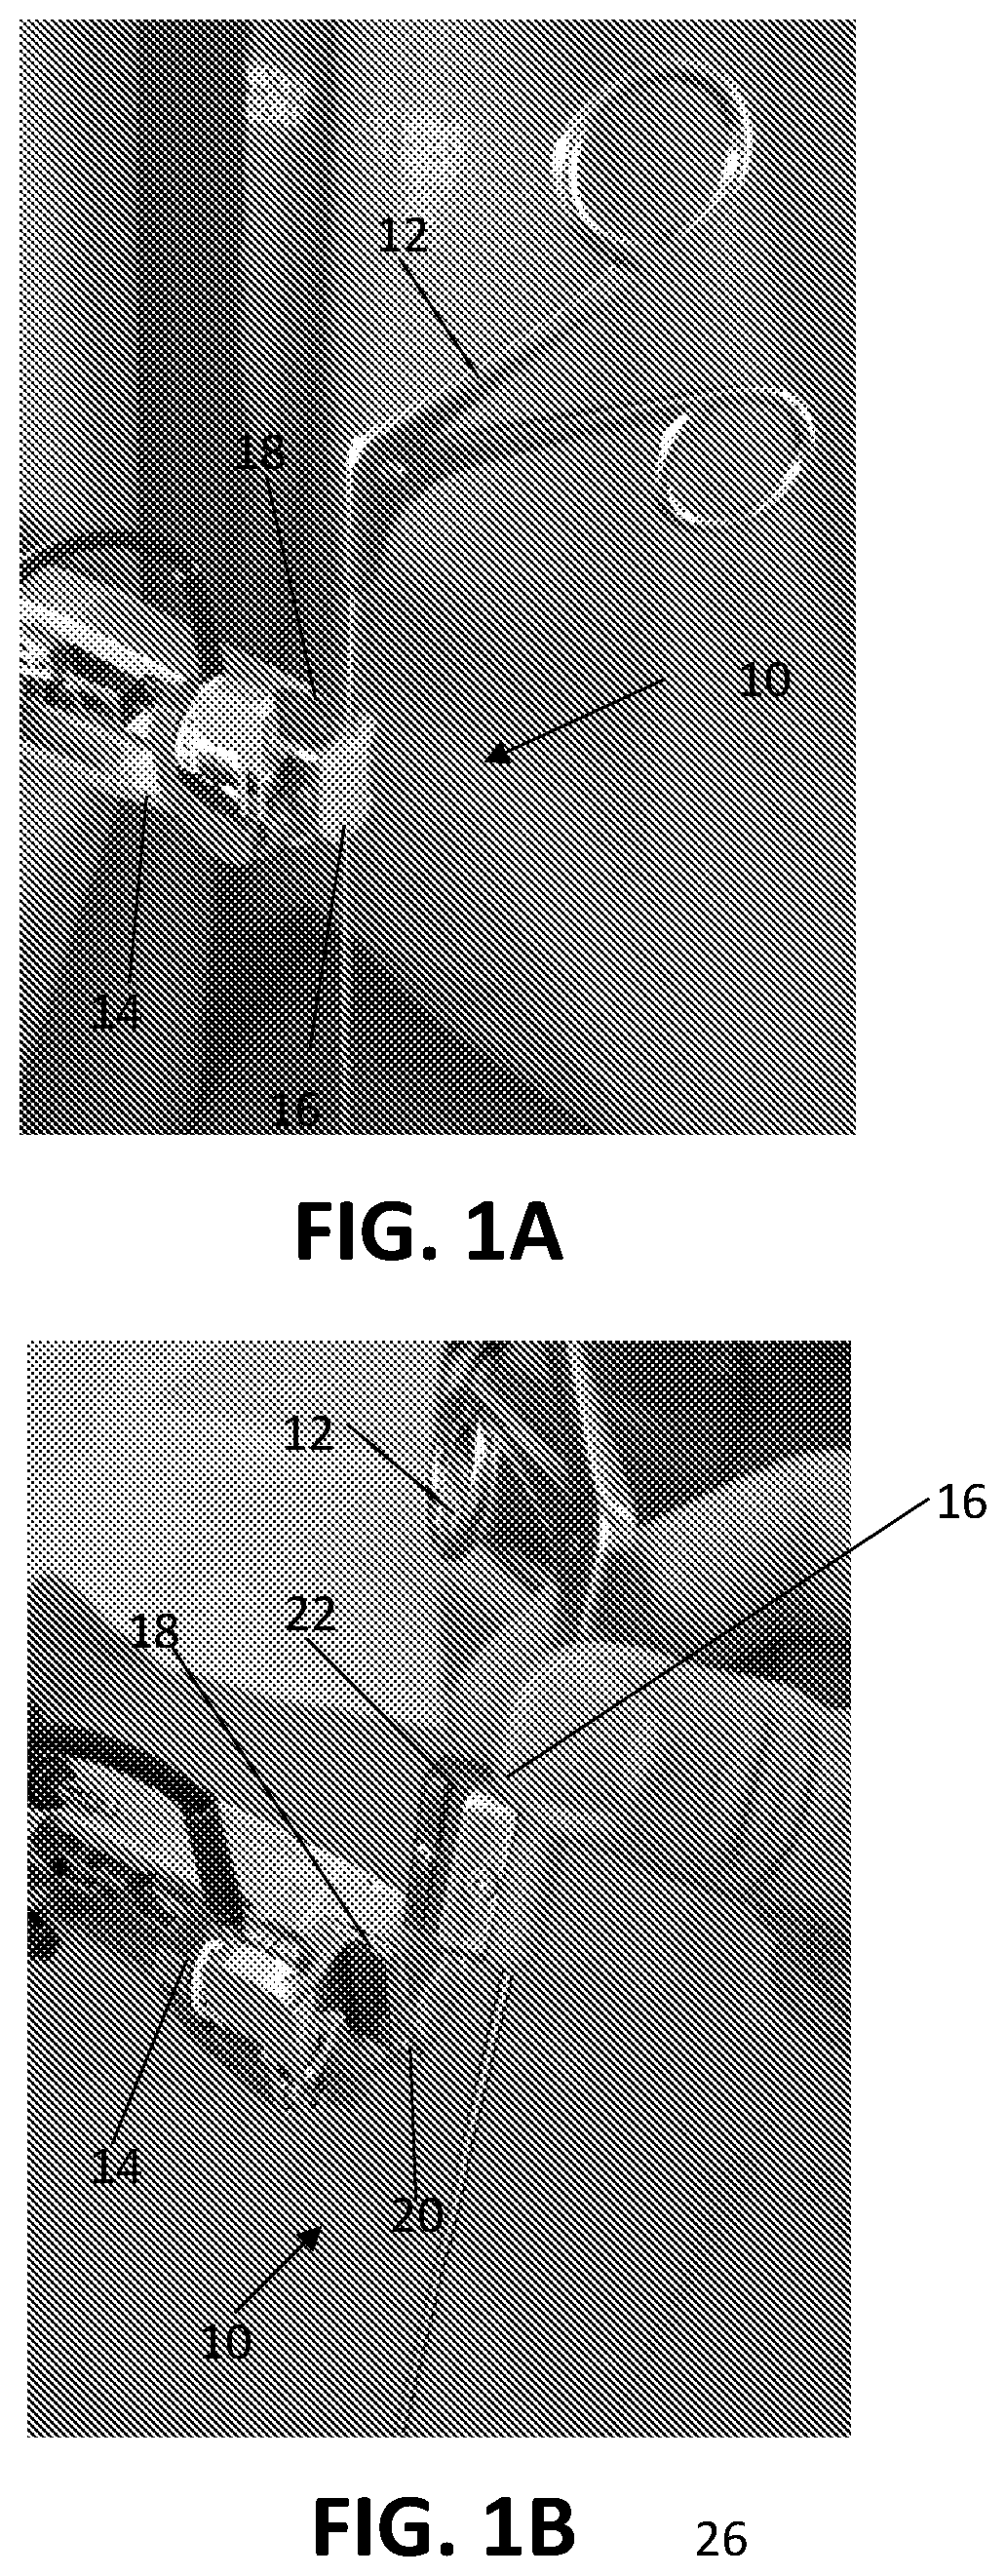 Universal surgical tool exchange and identification system